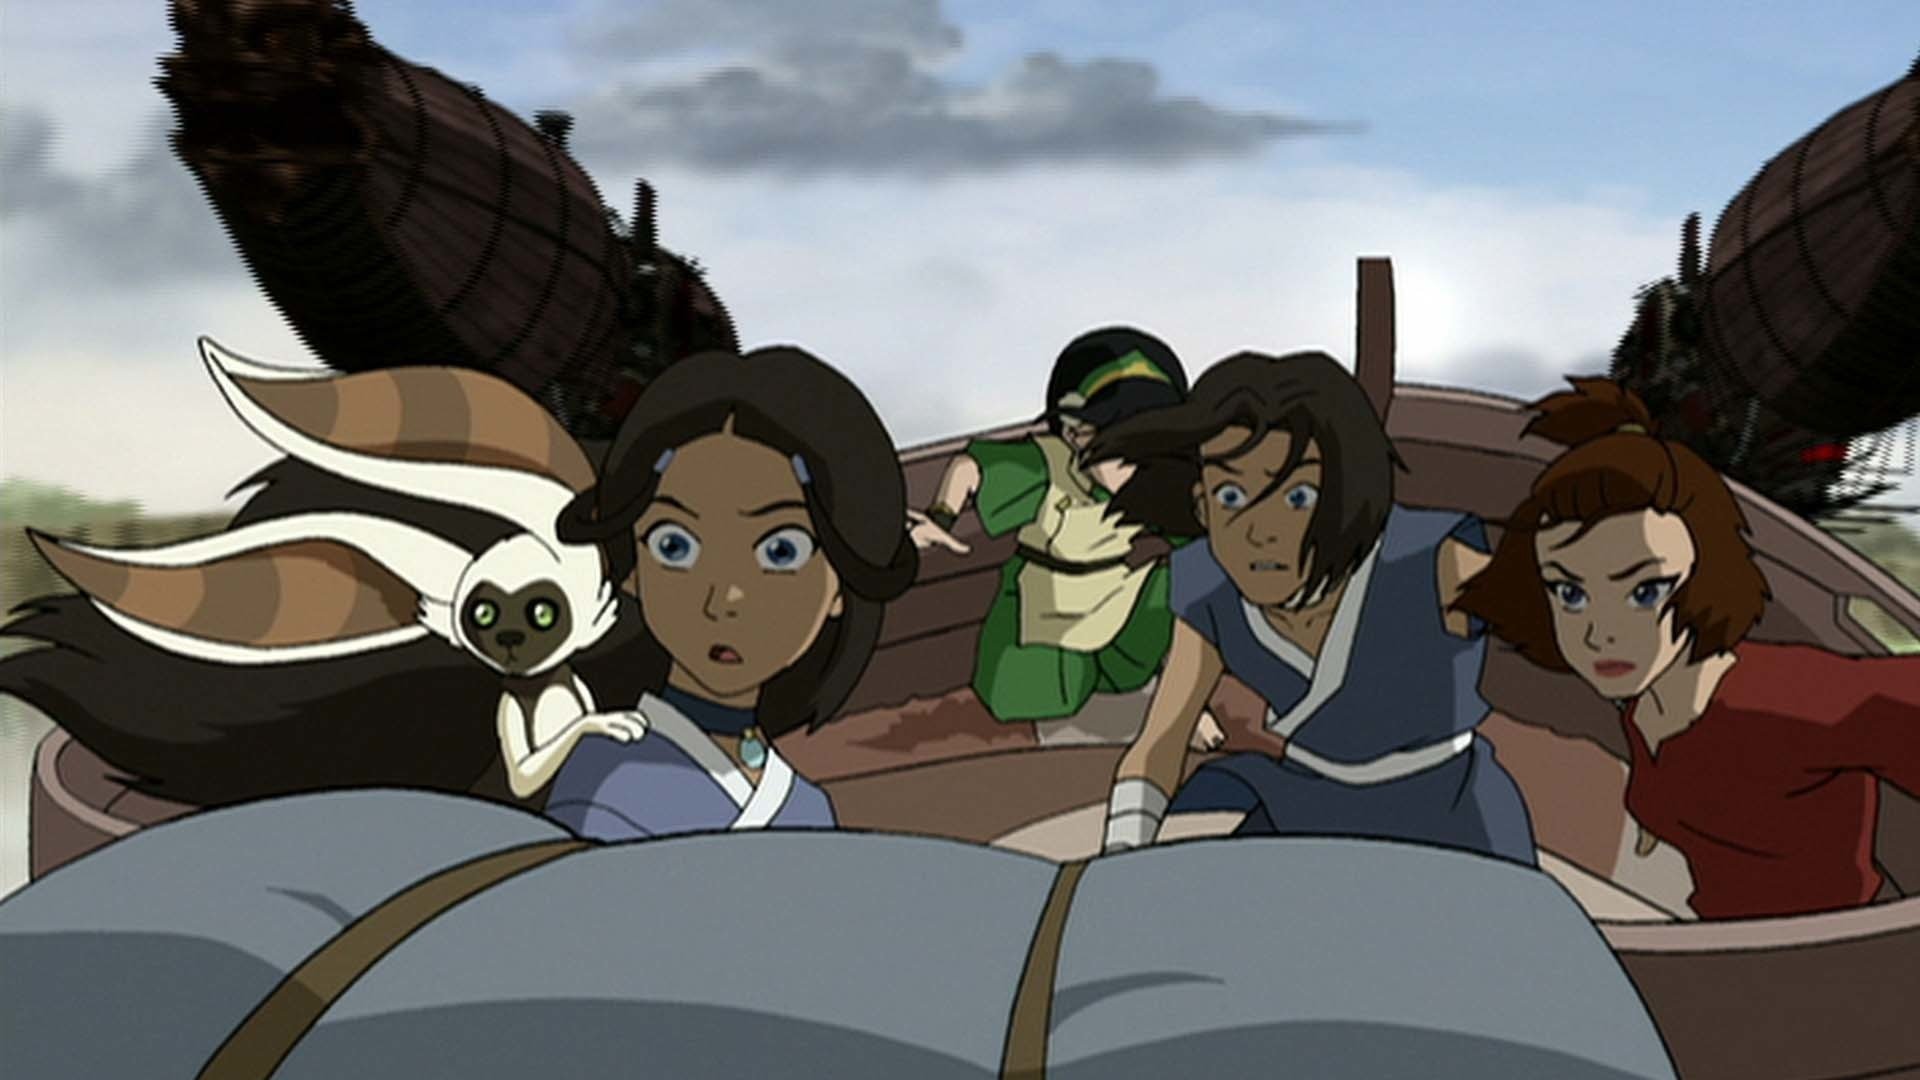 avatar the last airbender free online to watch